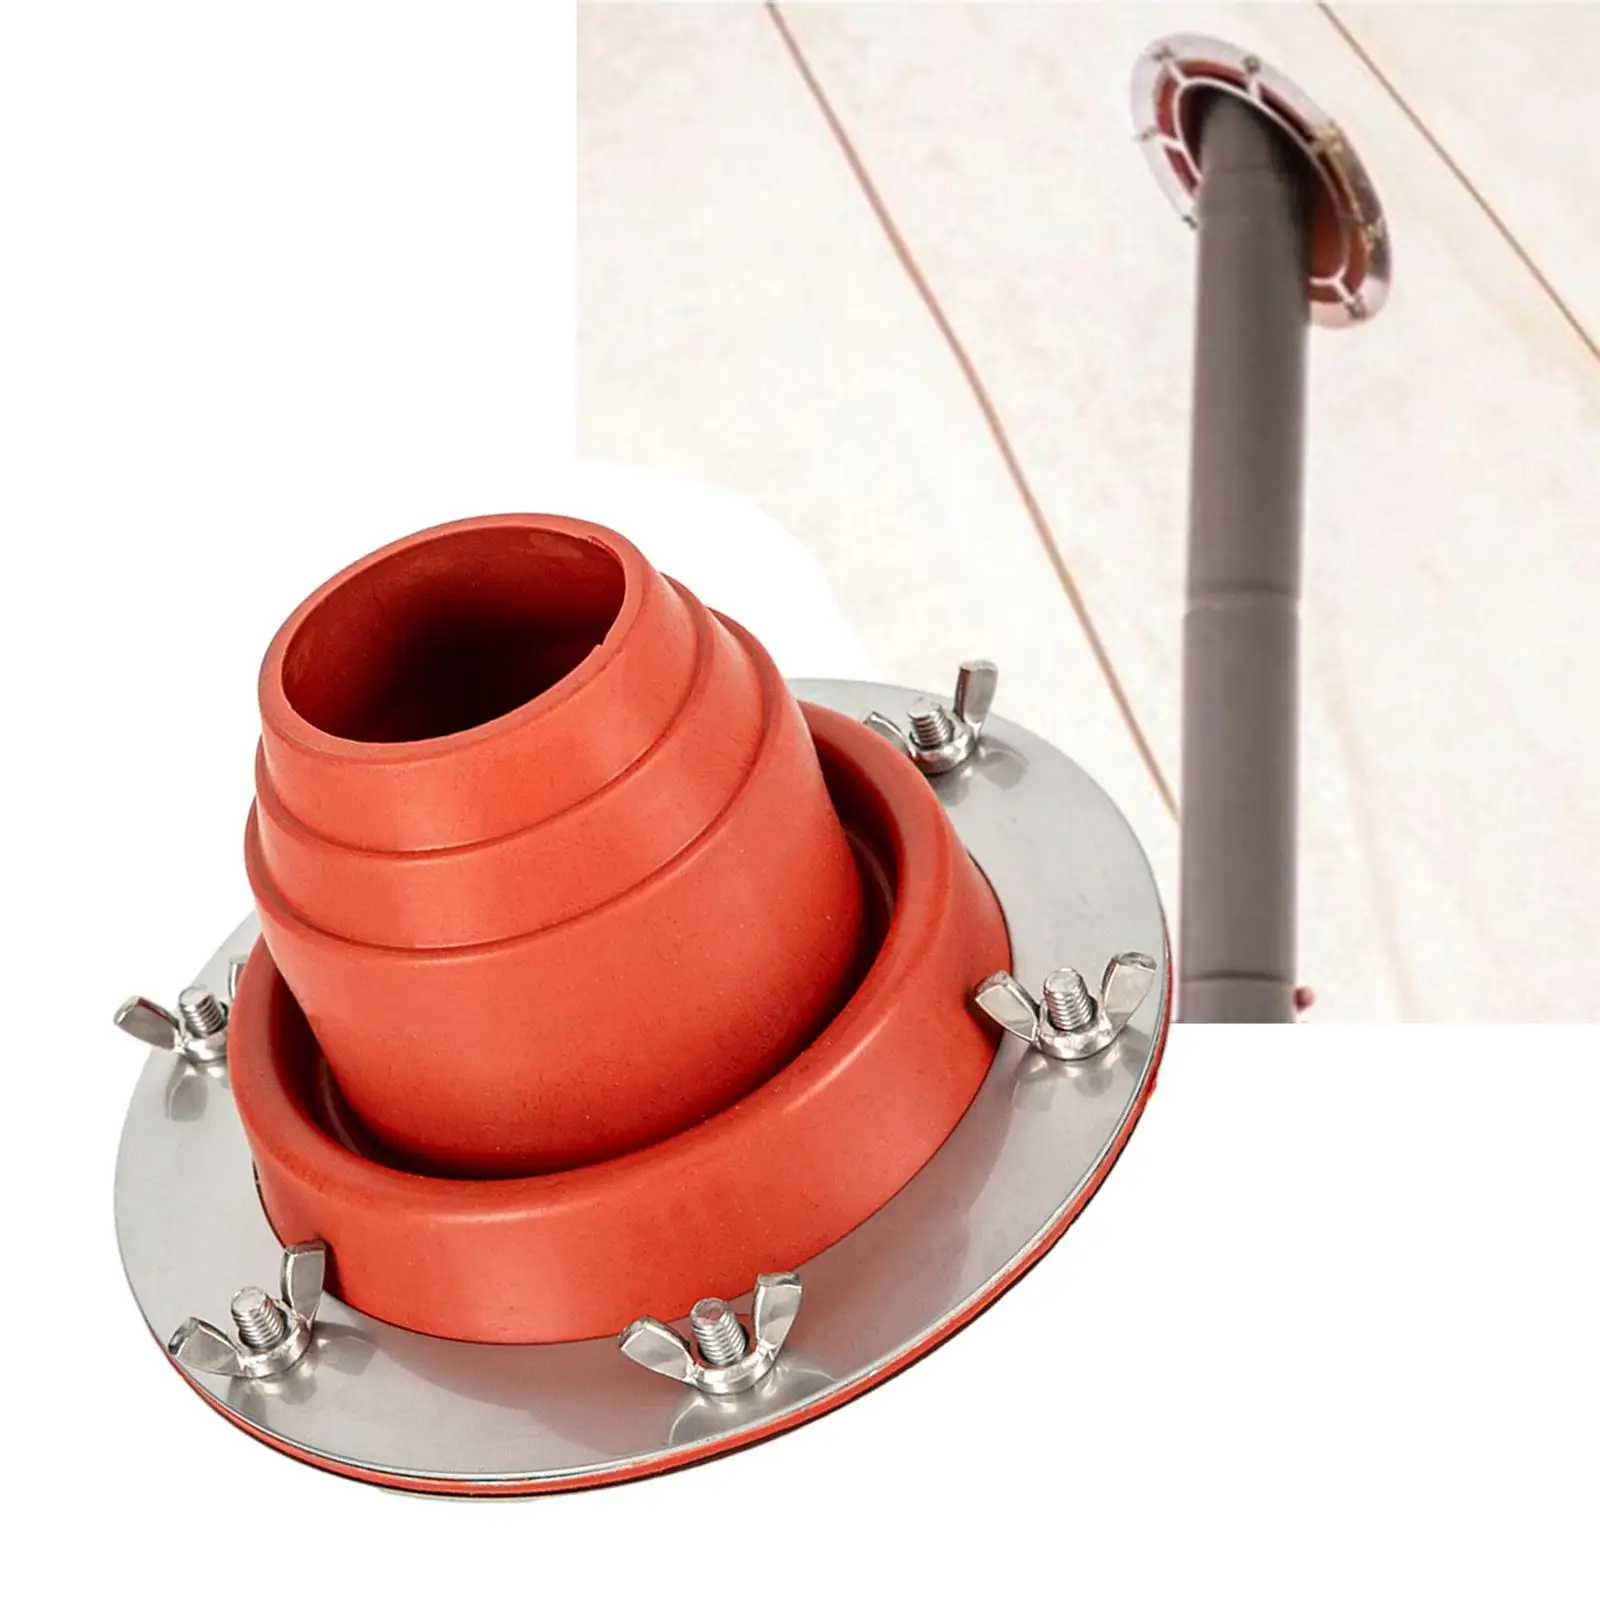 Silicone Tent Stove Jack Chimney Cover Outdoor Camping Silicone Fire Resistant Fireproof Protection Ring for Tent Backpacking